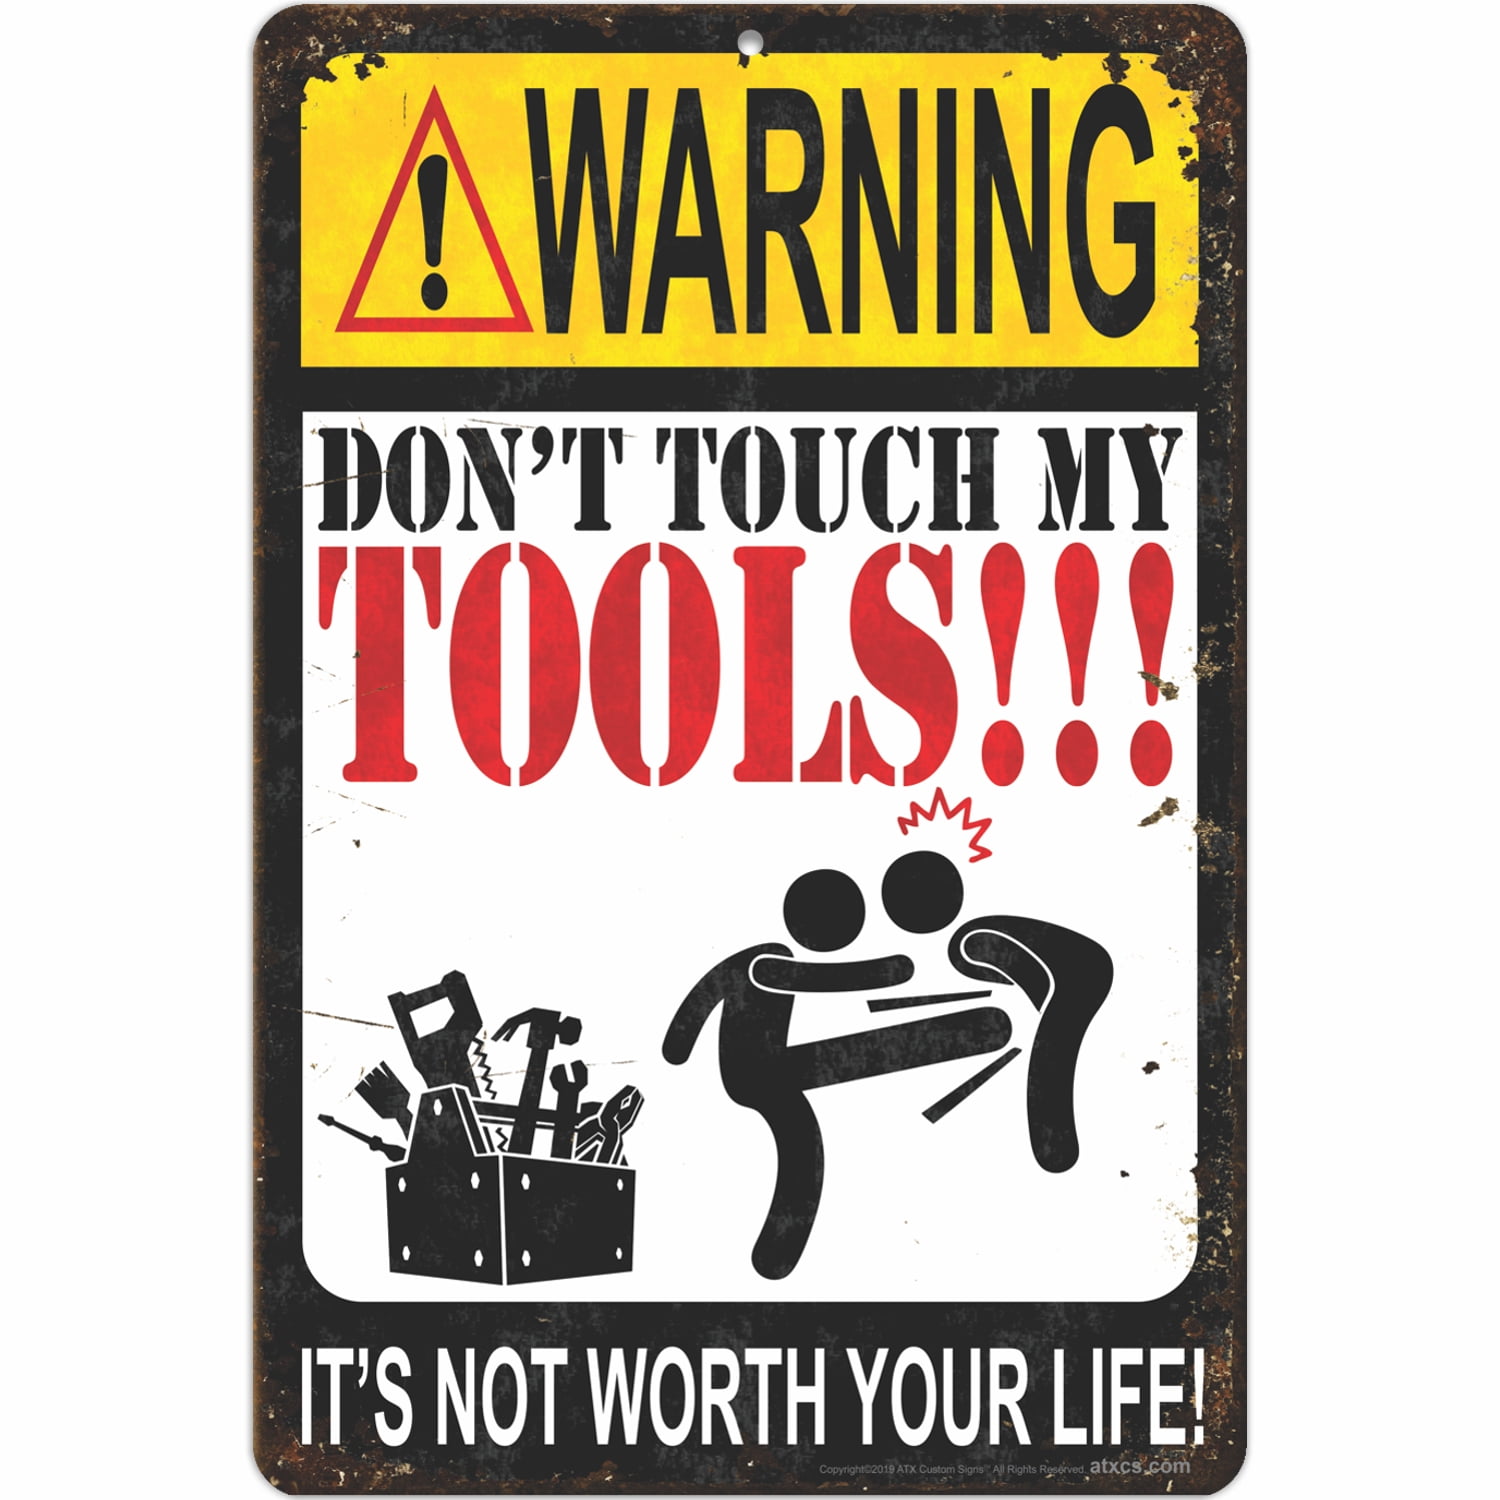 9"x12" aluminum sign Warning If You Like Your Hands Don't Touch MY Tools